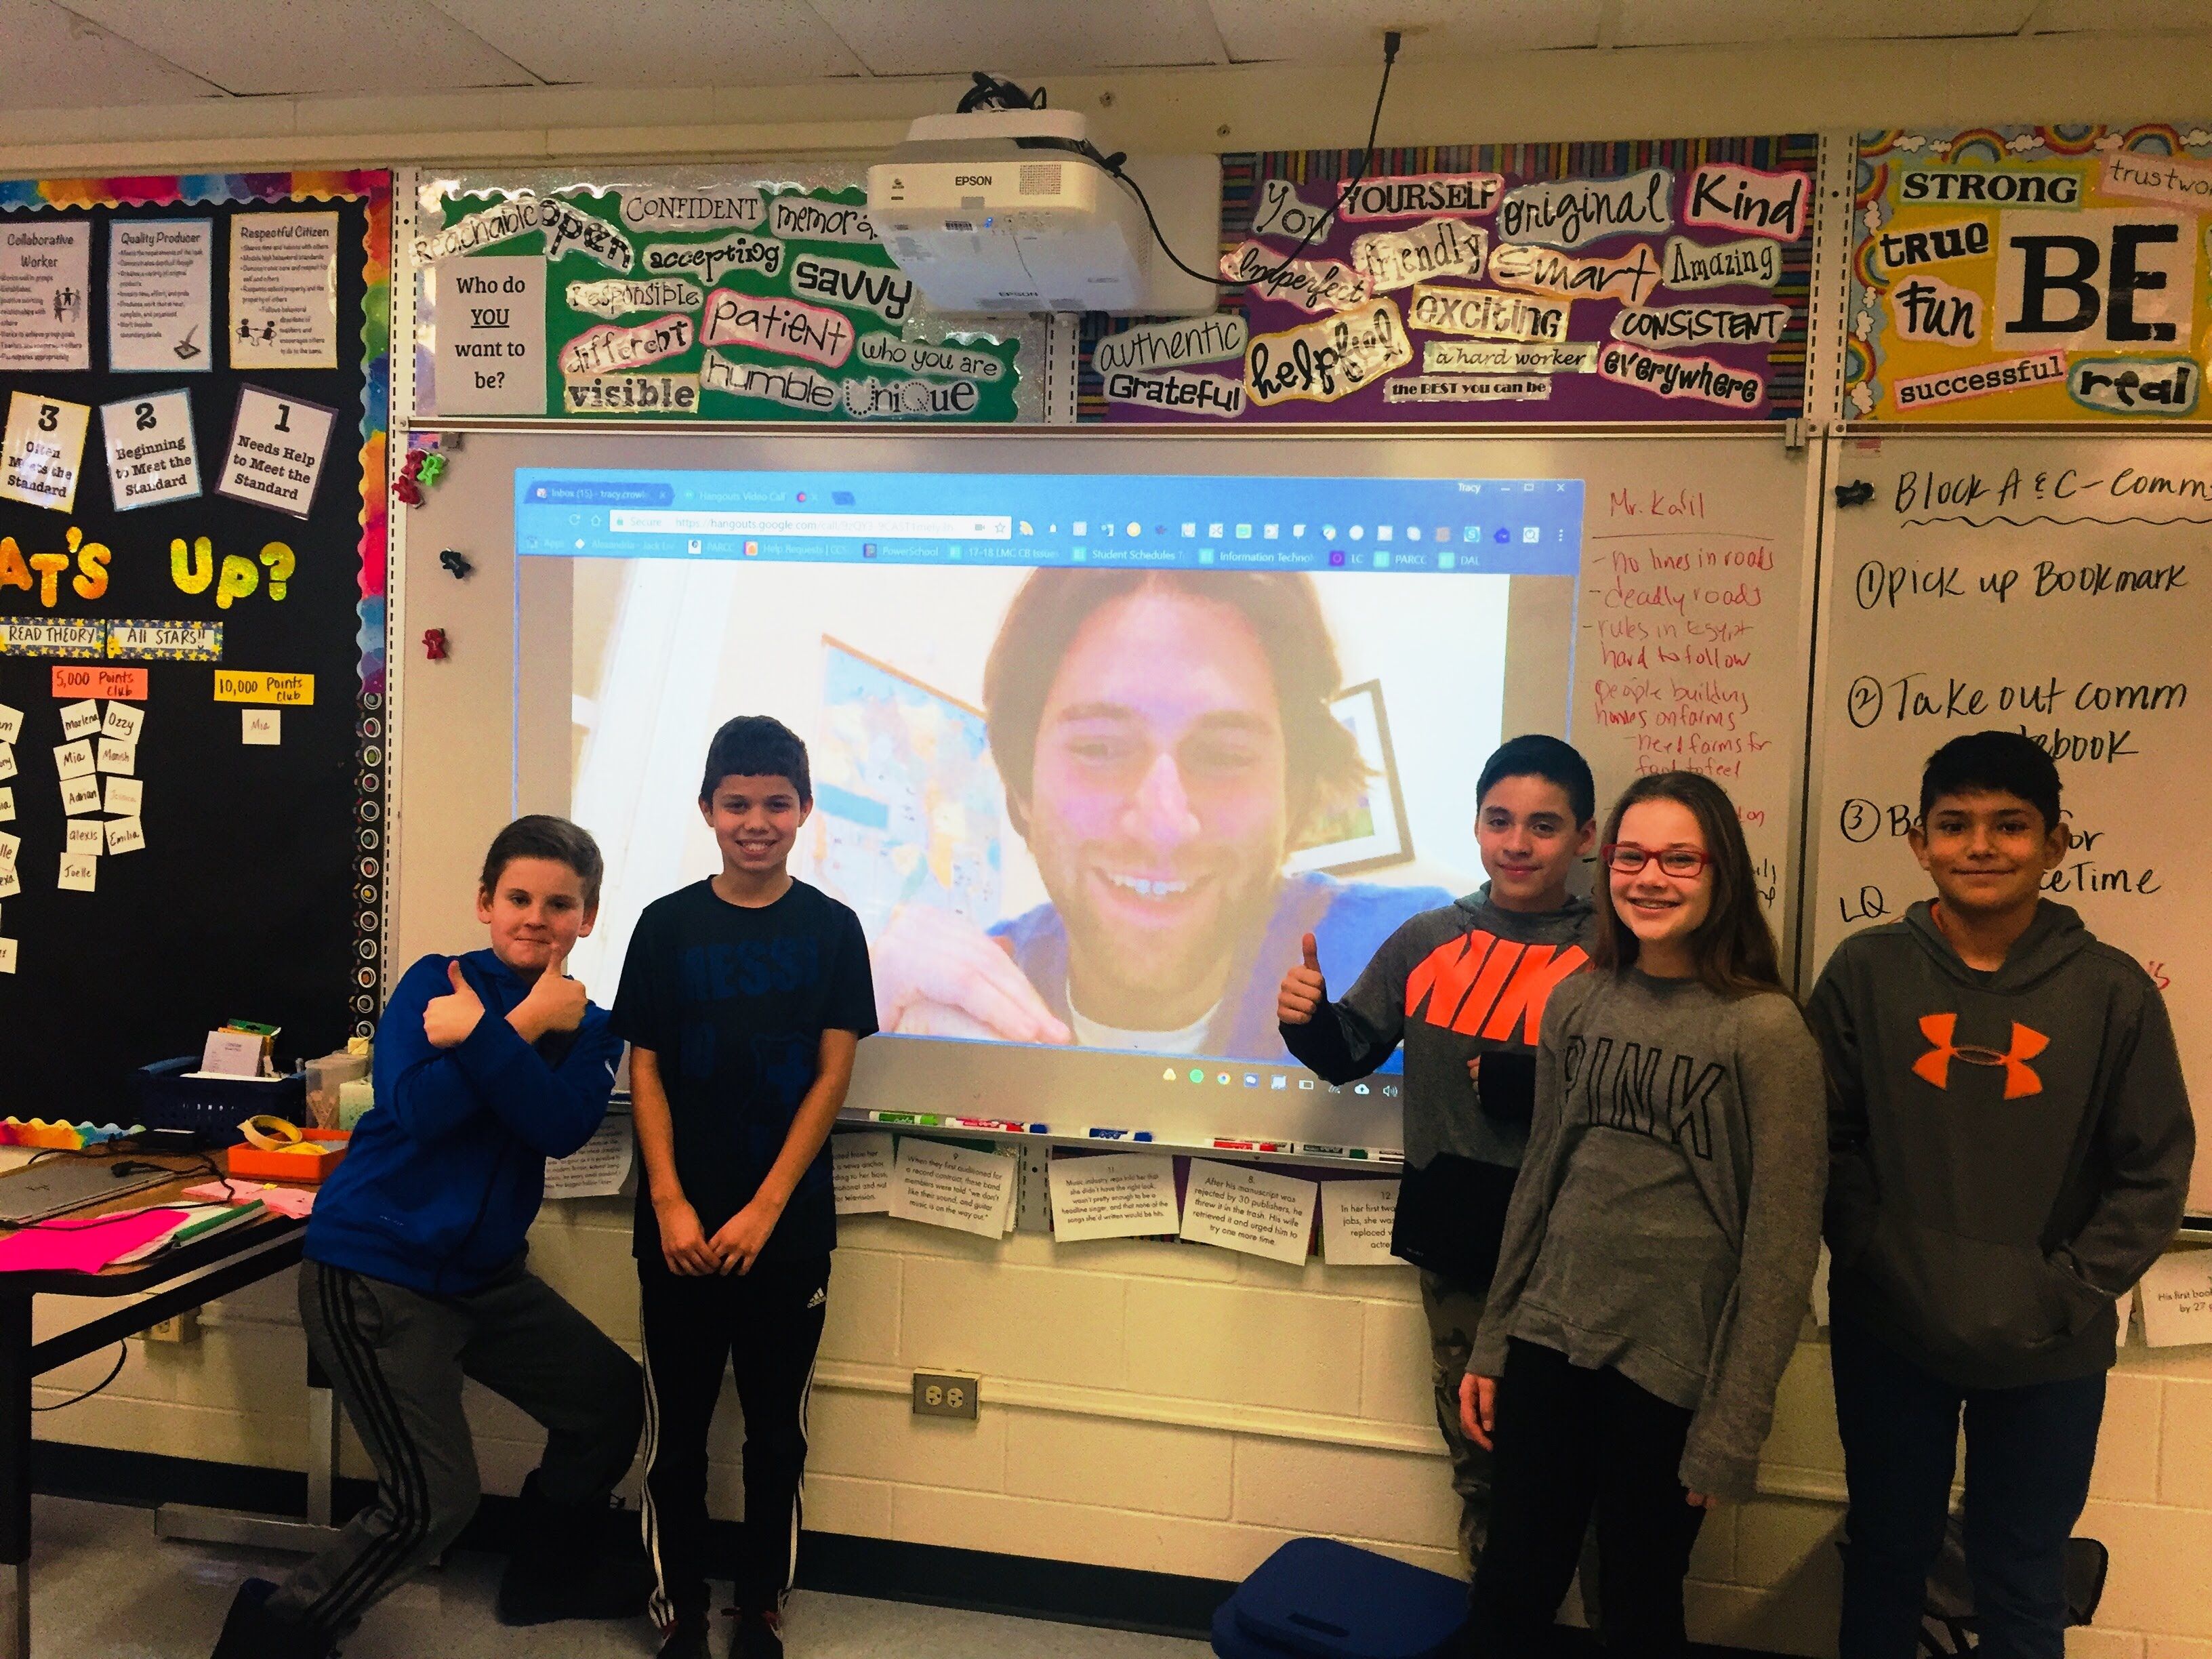 Jahd Khalil dials in from Cairo to speak with Jack London Middle School 6th graders. Image courtesy of Tracy Crowley. United States, 2018.